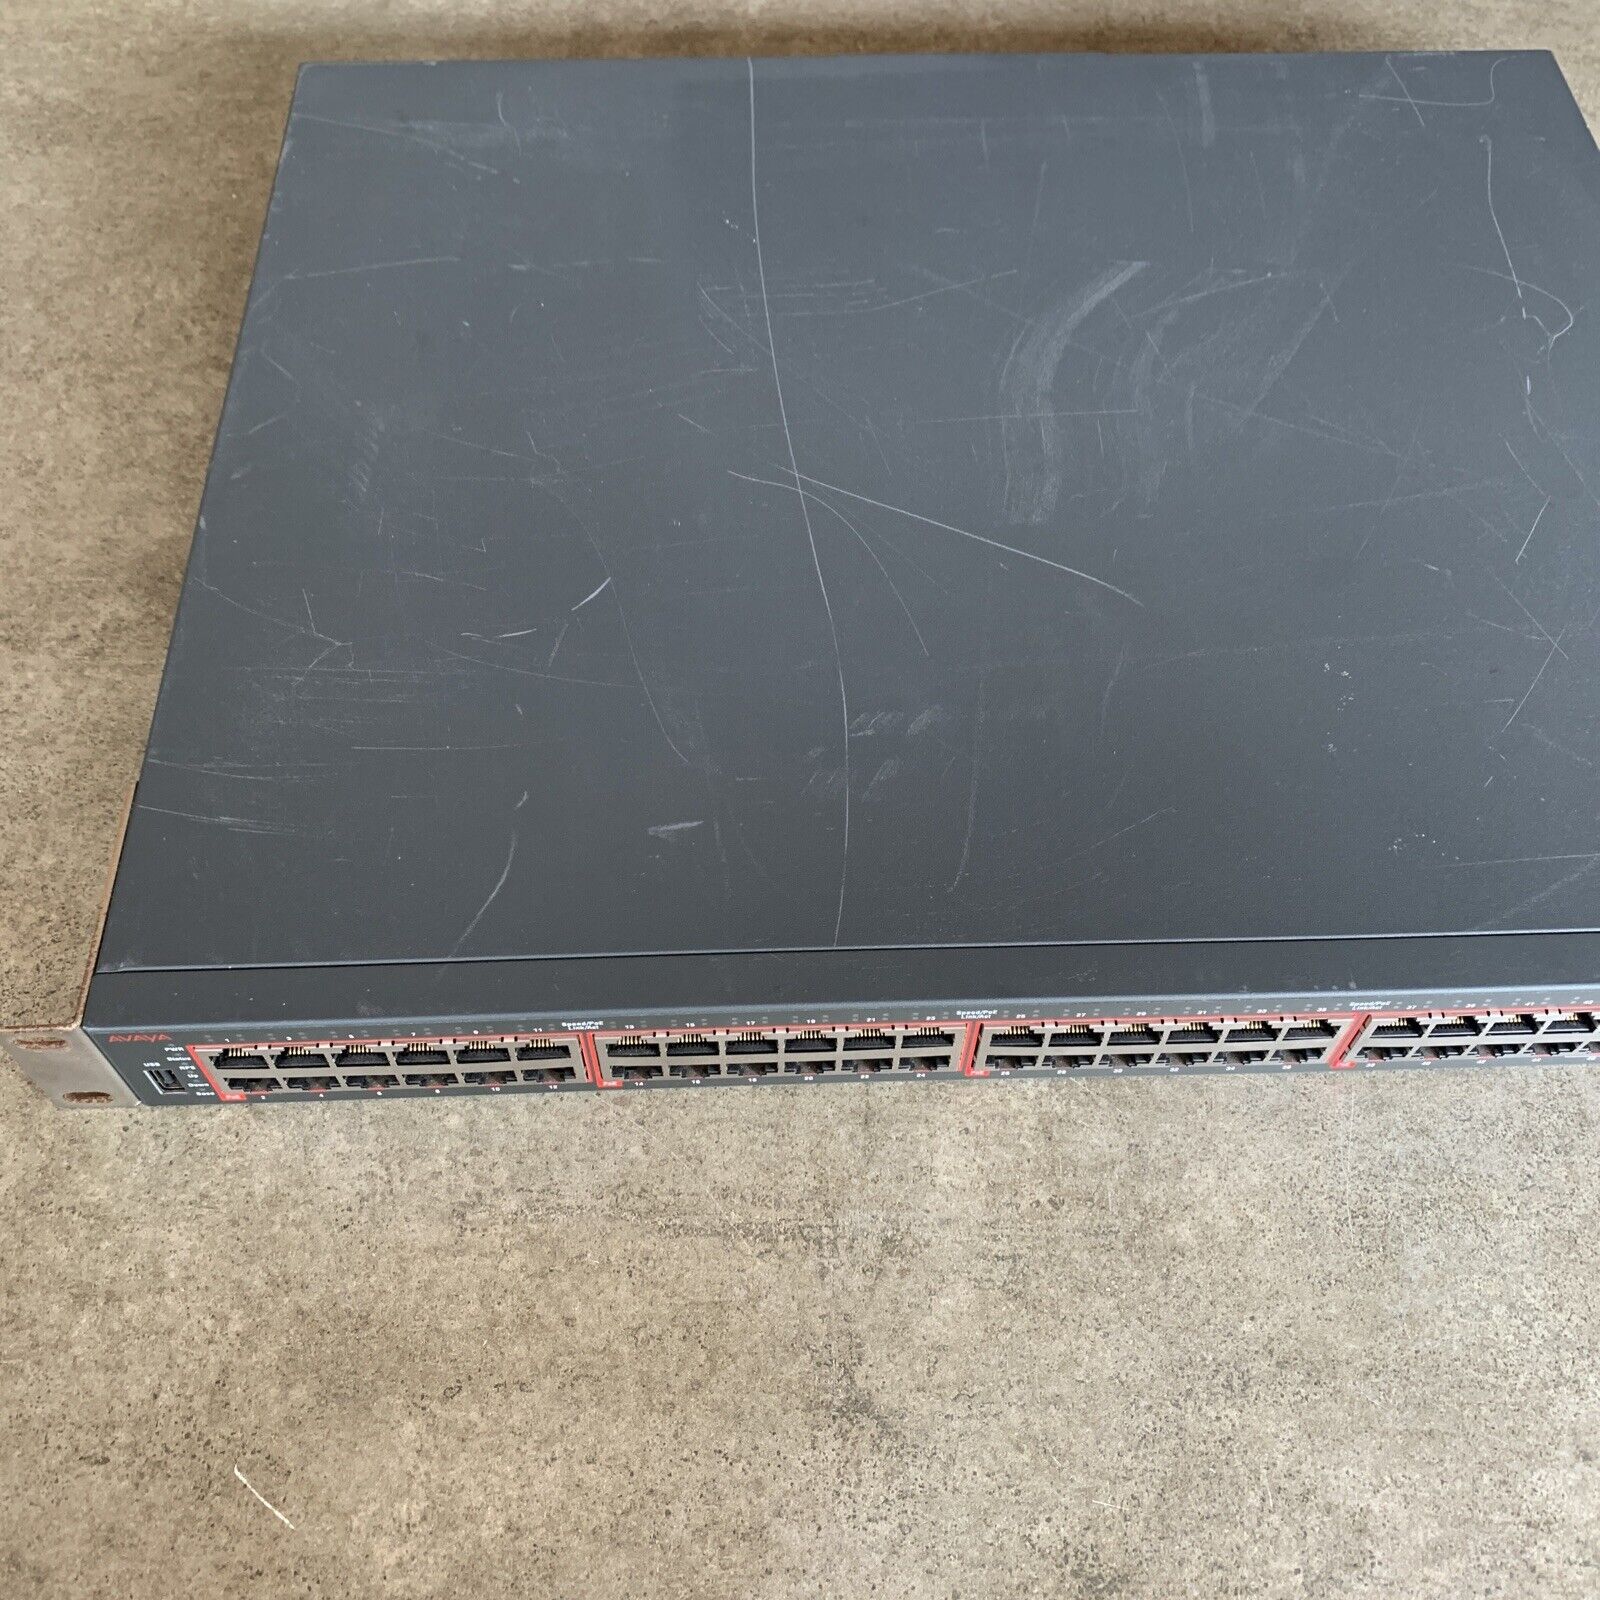 AVAYA 4548GT-PWR 48 Port Ethernet Routing Switch w/ Power & Stack Cables